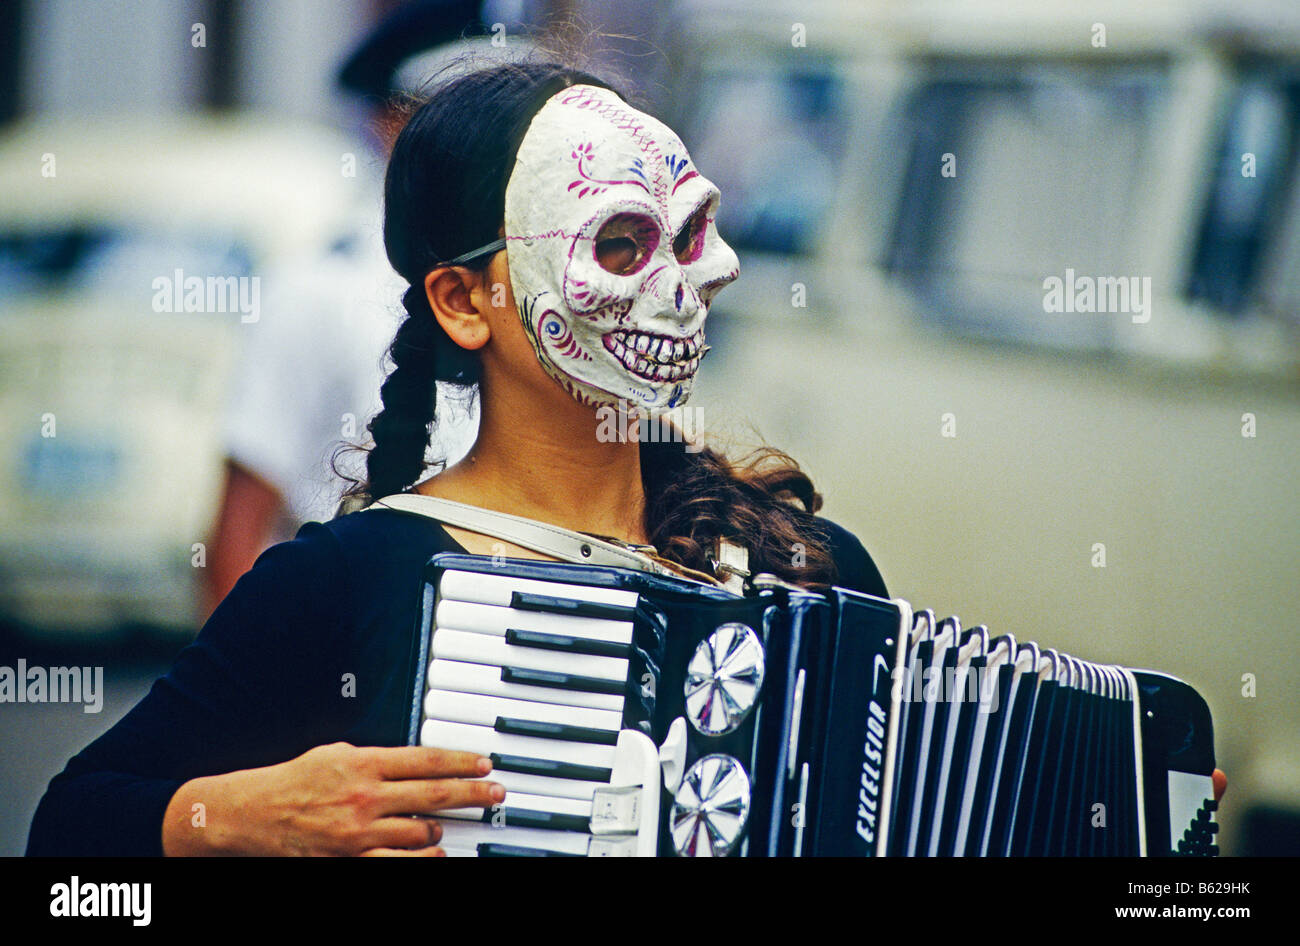 Accordion player wearing a skull or death mask during the Day of the Dead Festival, held on All Saints' Day or All Hallows in P Stock Photo